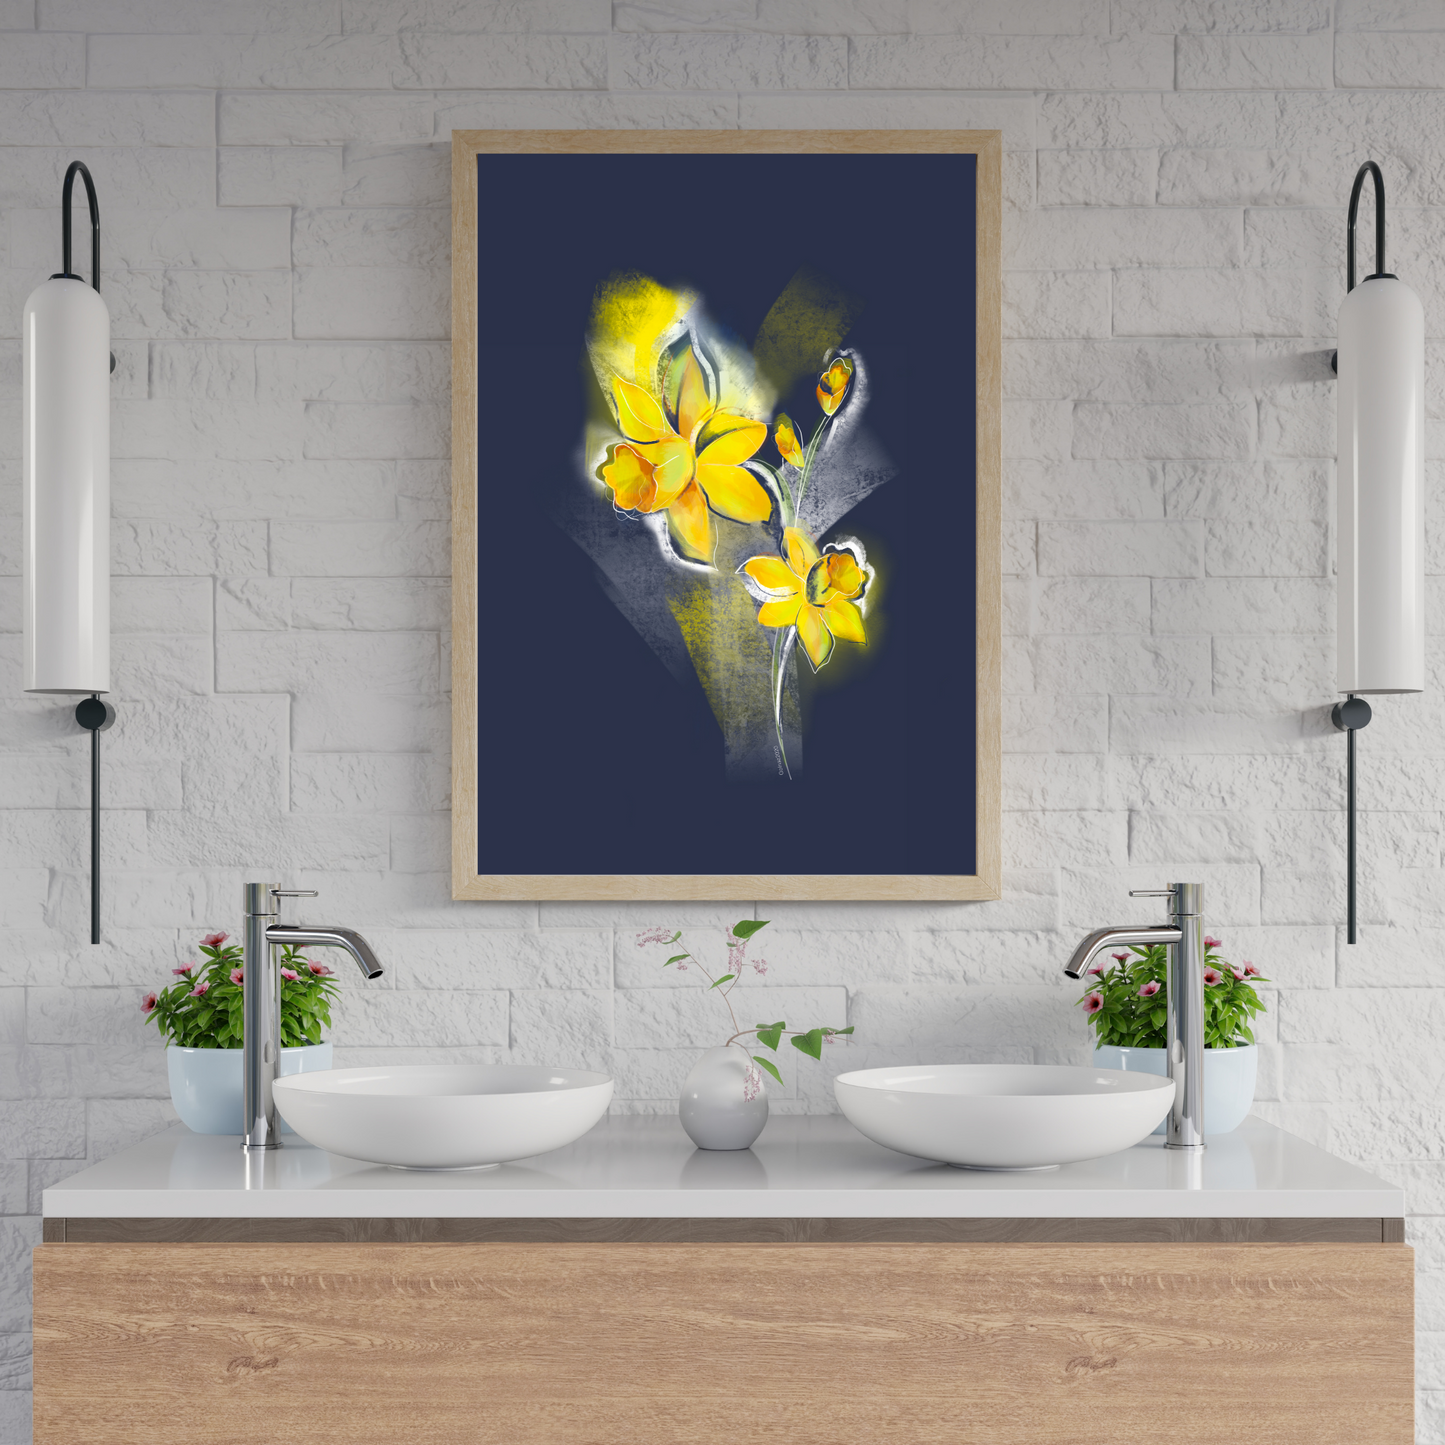 An example of the Morning Daffodil by ArisaTeam in a bathroom